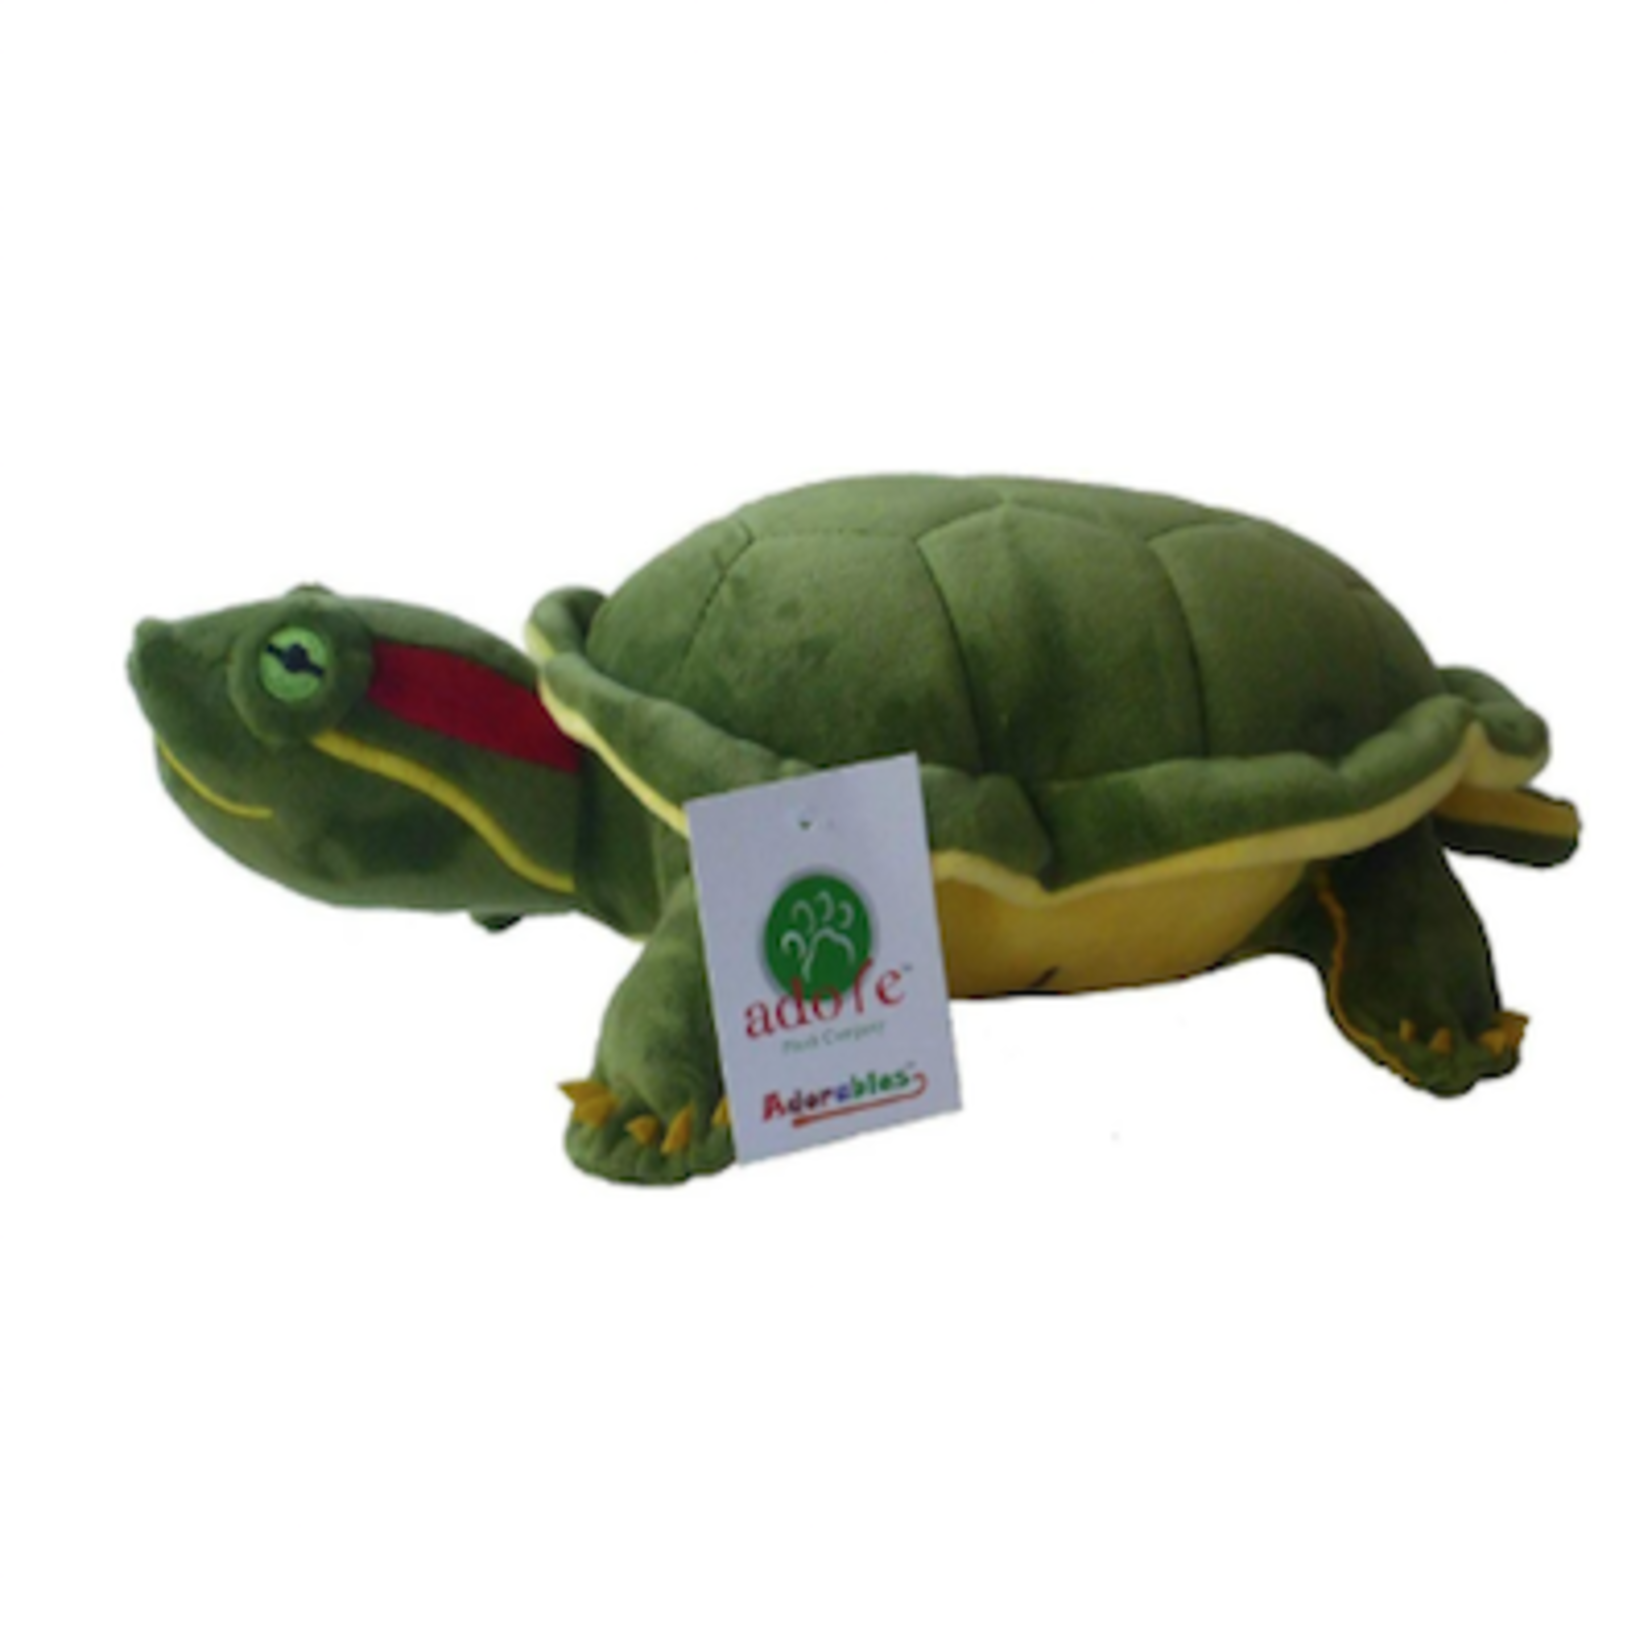 ADORE Shelly the Red Eared Slider Turtle Stuffed Toy Plushie 16"